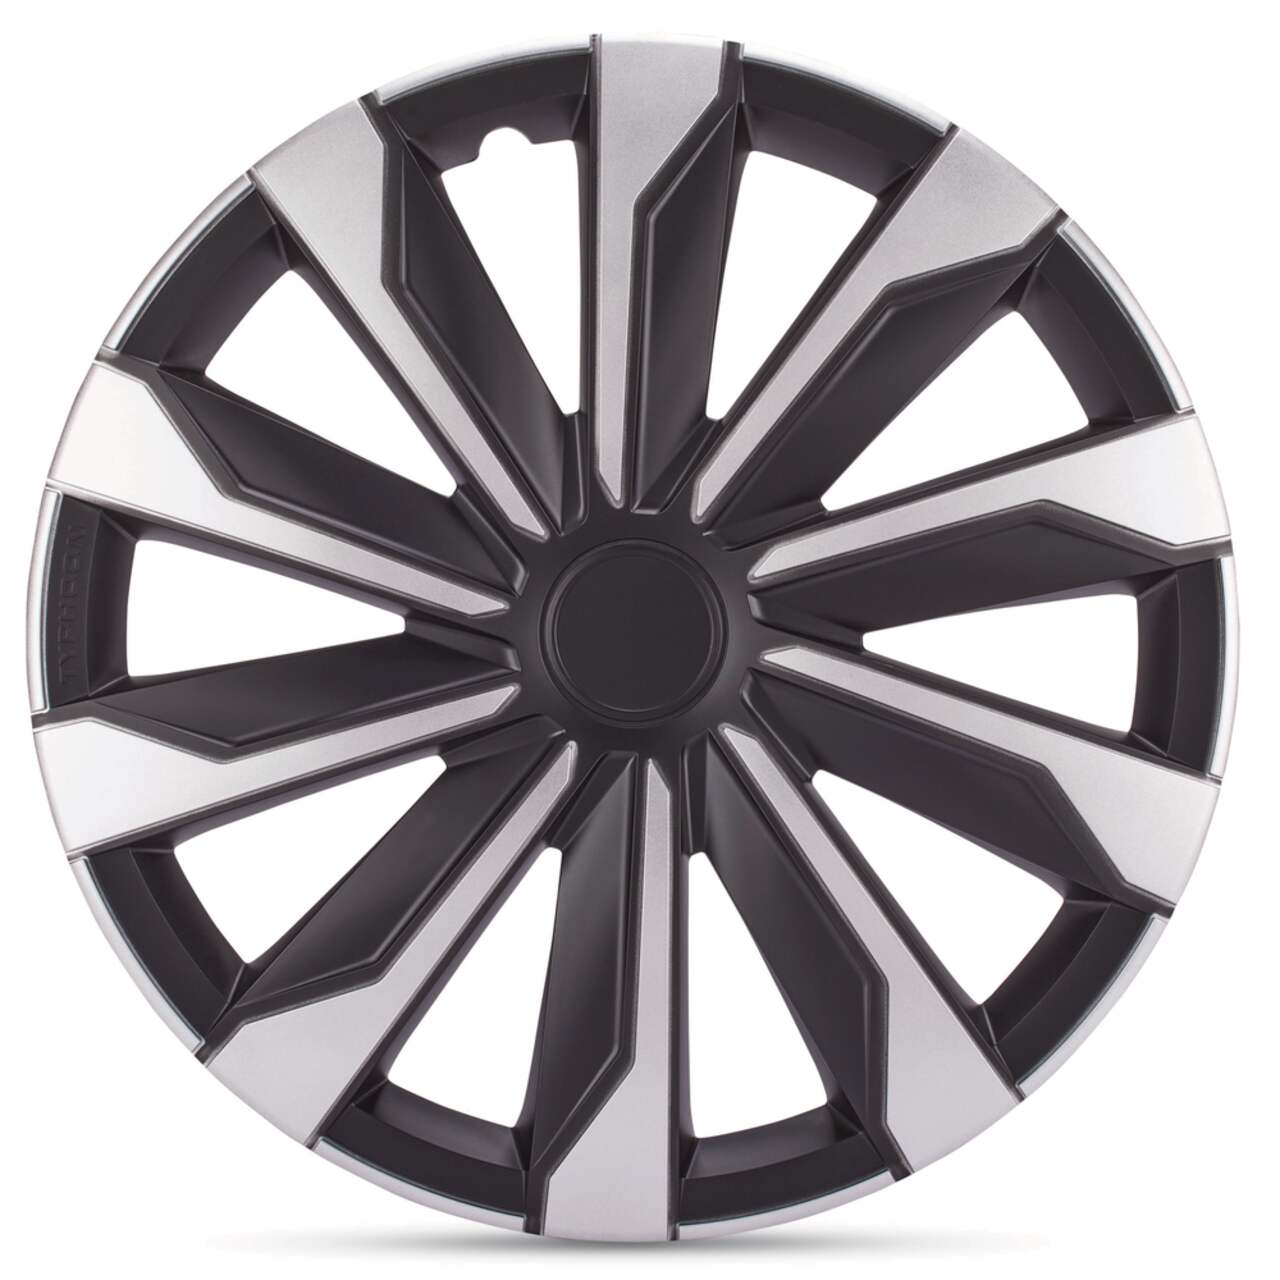 AutoTrends Shaft Wheel Cover, Silver/Black, 18-in, 4-pk